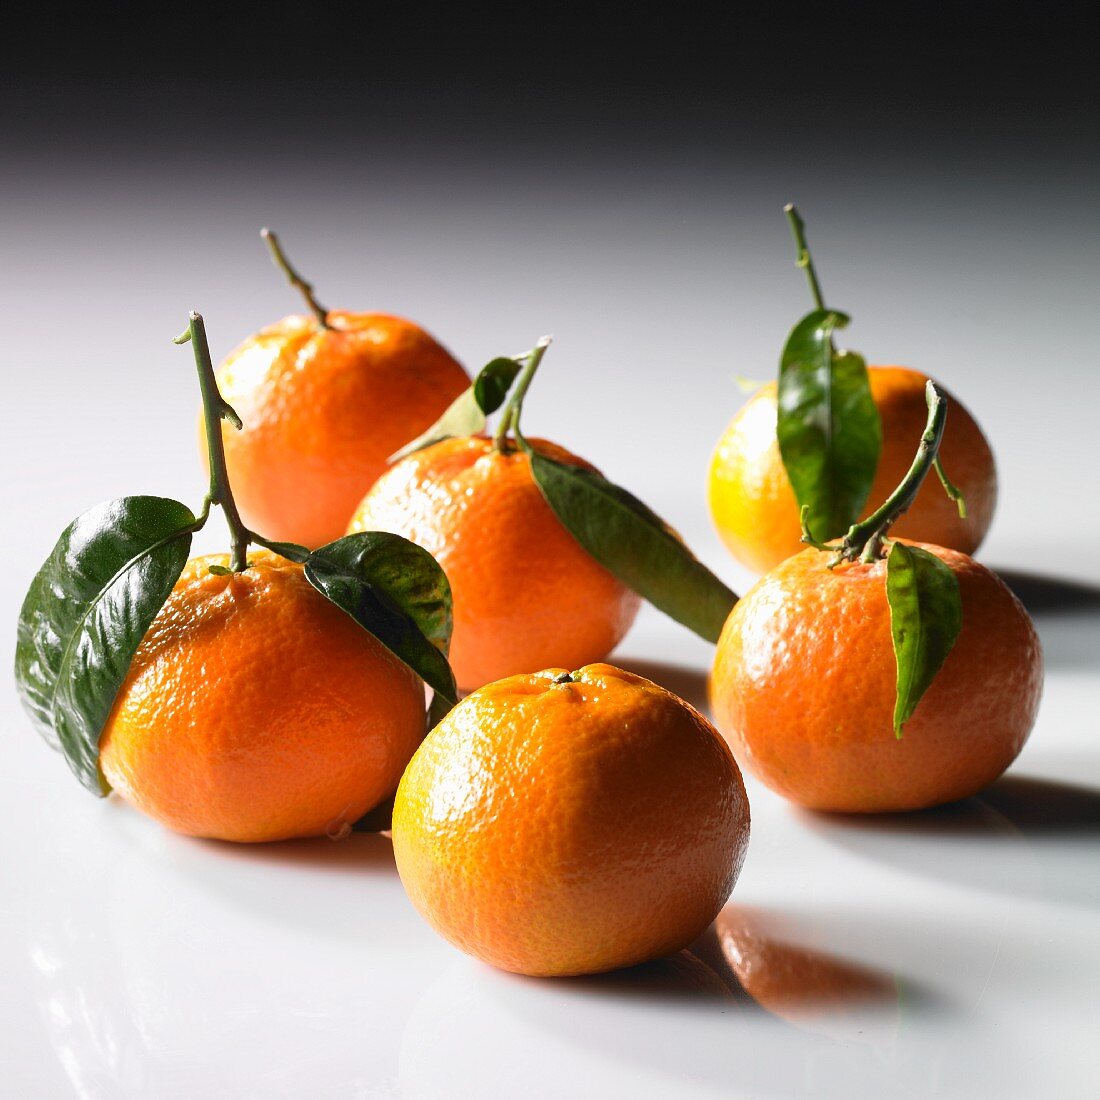 Mandarins with stems and leaves